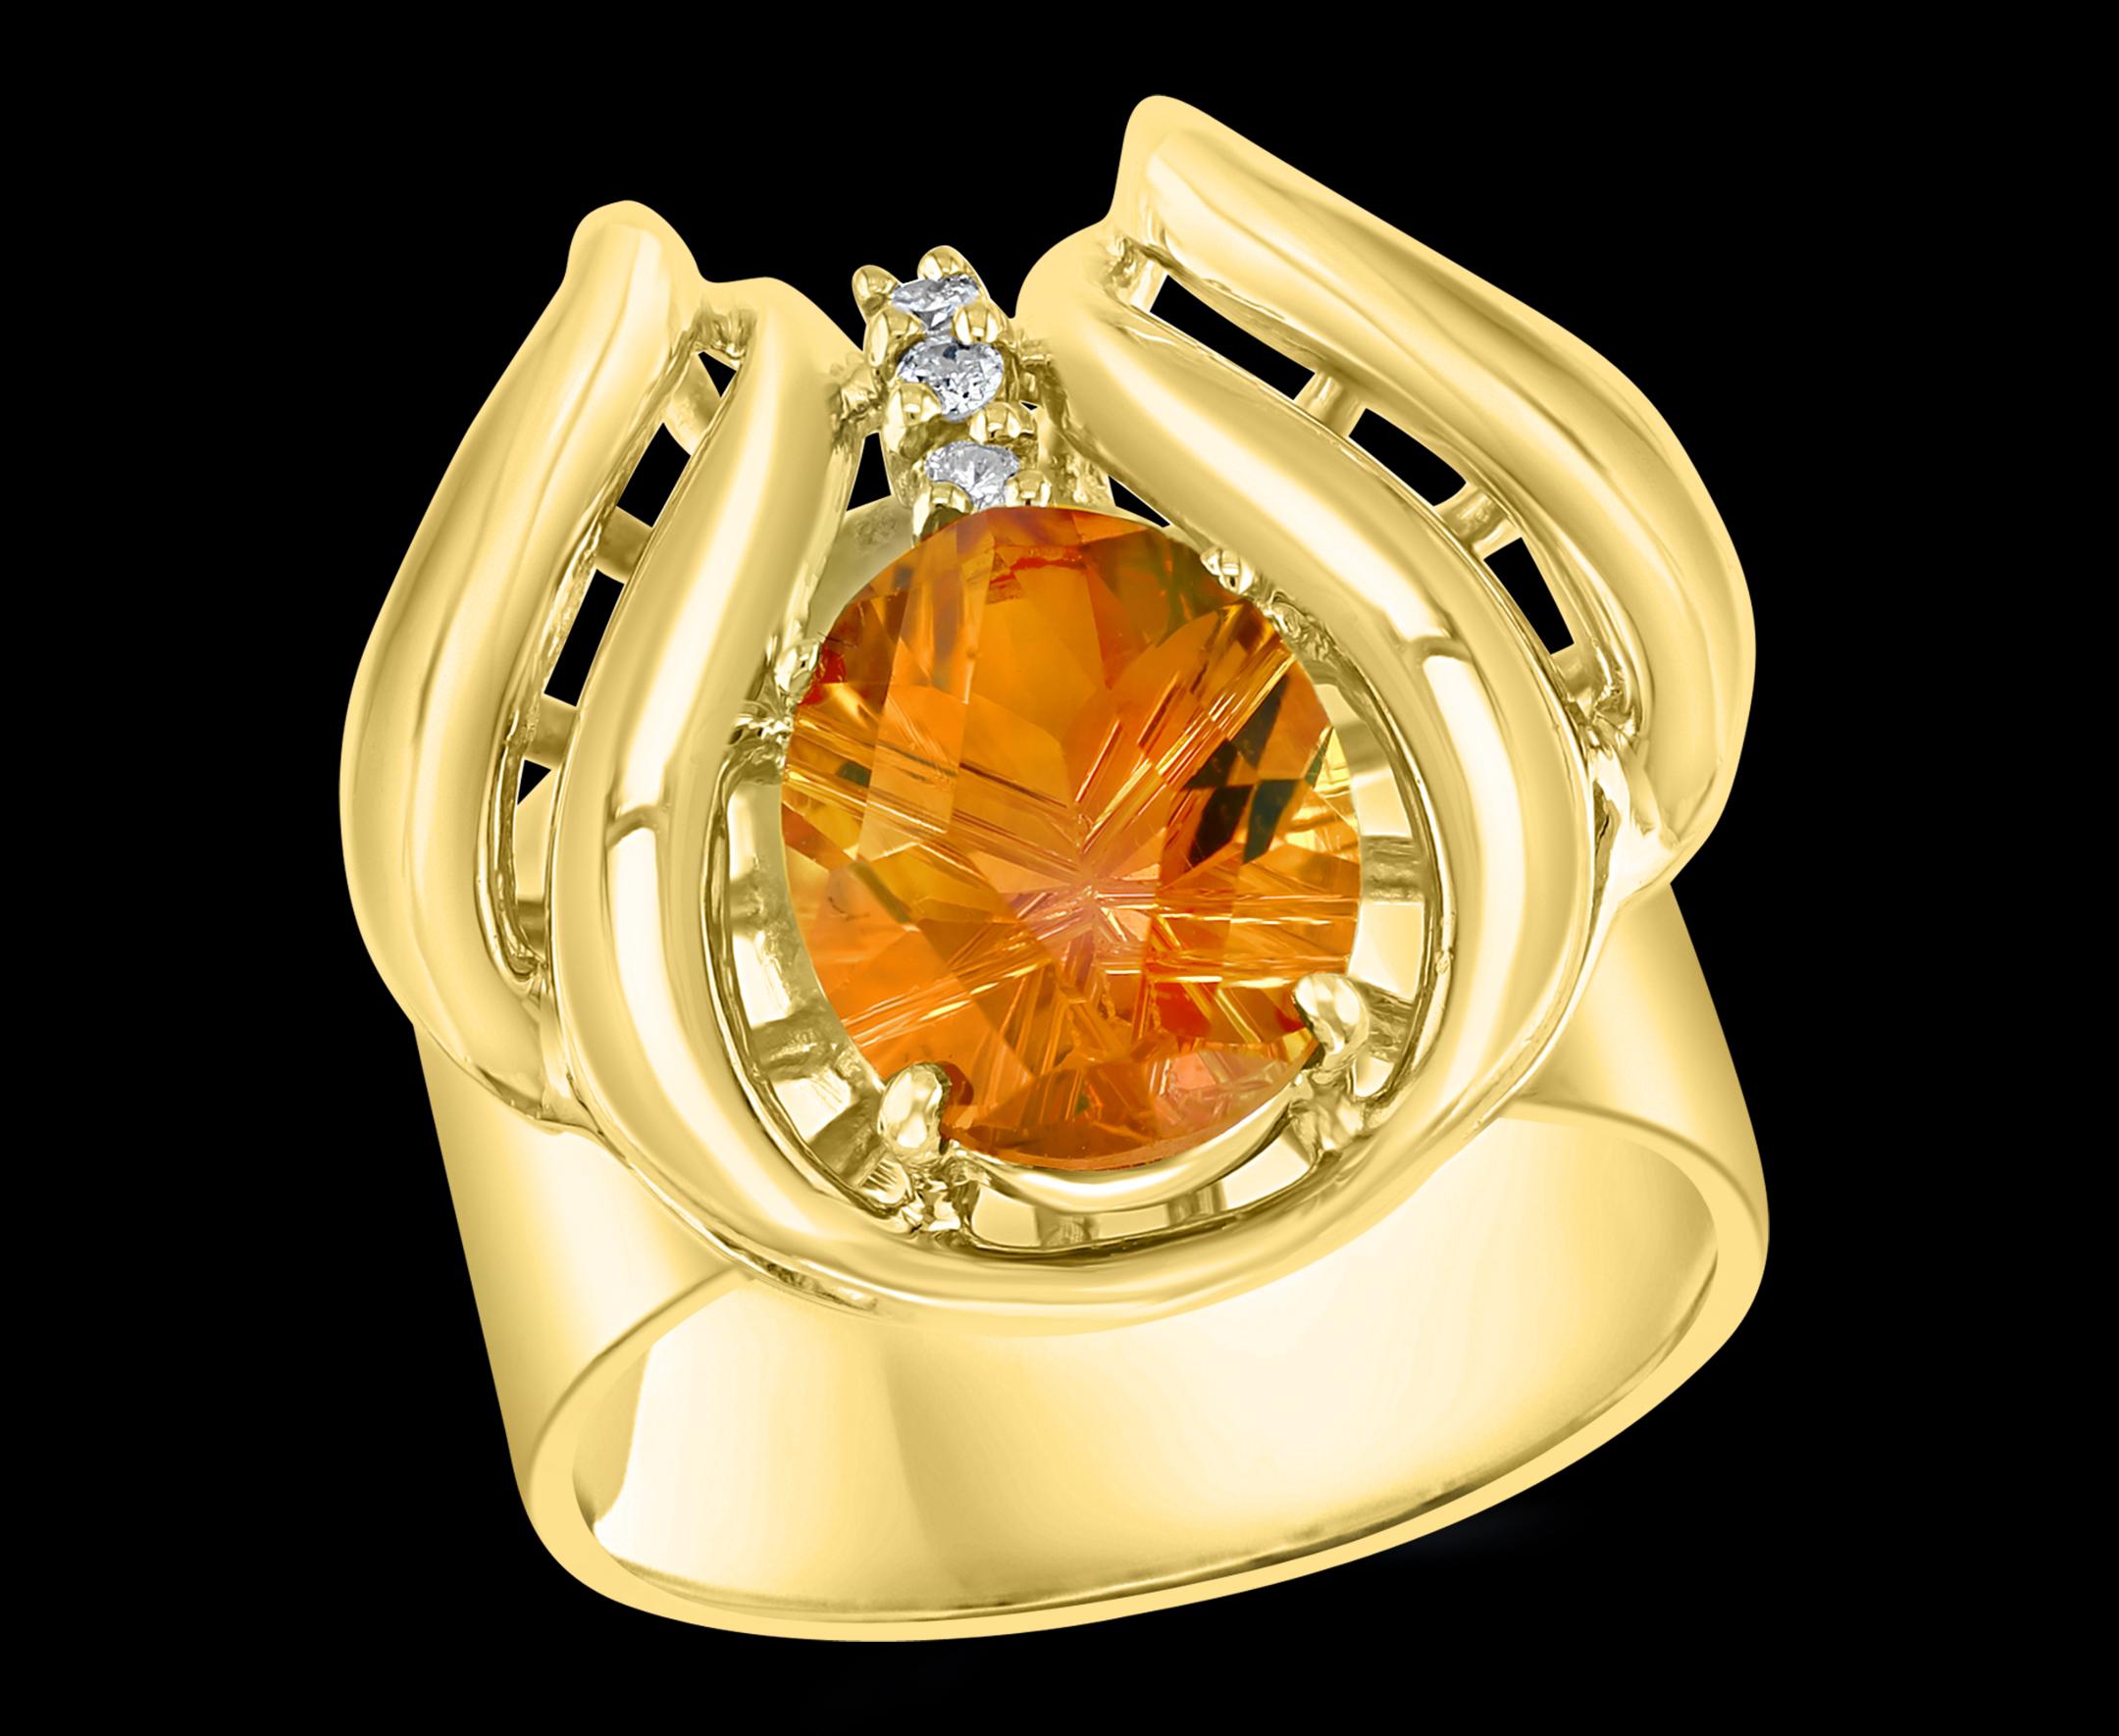 Approximately 4 Carat  Oval Citrine  And Diamond Ring In 14 Karat Yellow Gold , Estate
Leisure cut citrine stone
This is a ring which has a  approximately 4 carat of high quality Citrine stone. The stone is 11X10 MM
Color and clarity is very nice.
